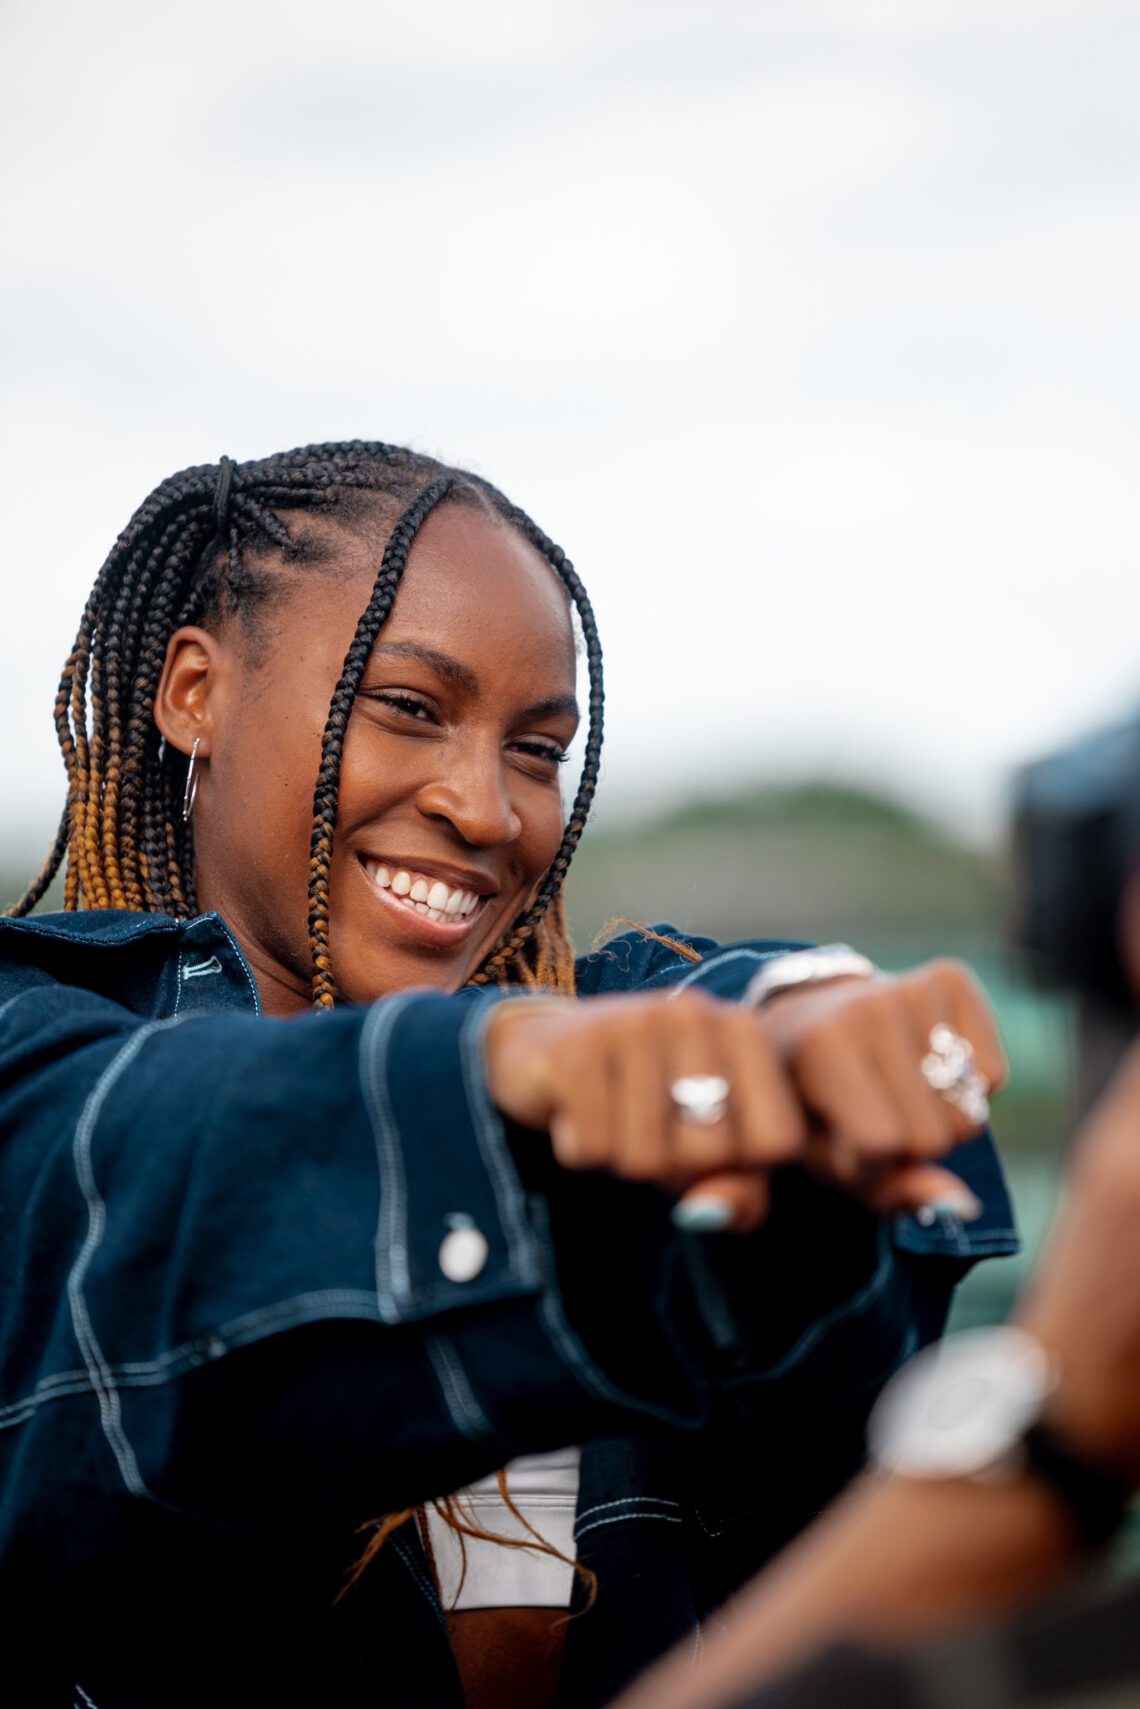 Coco Gauff Smile In With Braids